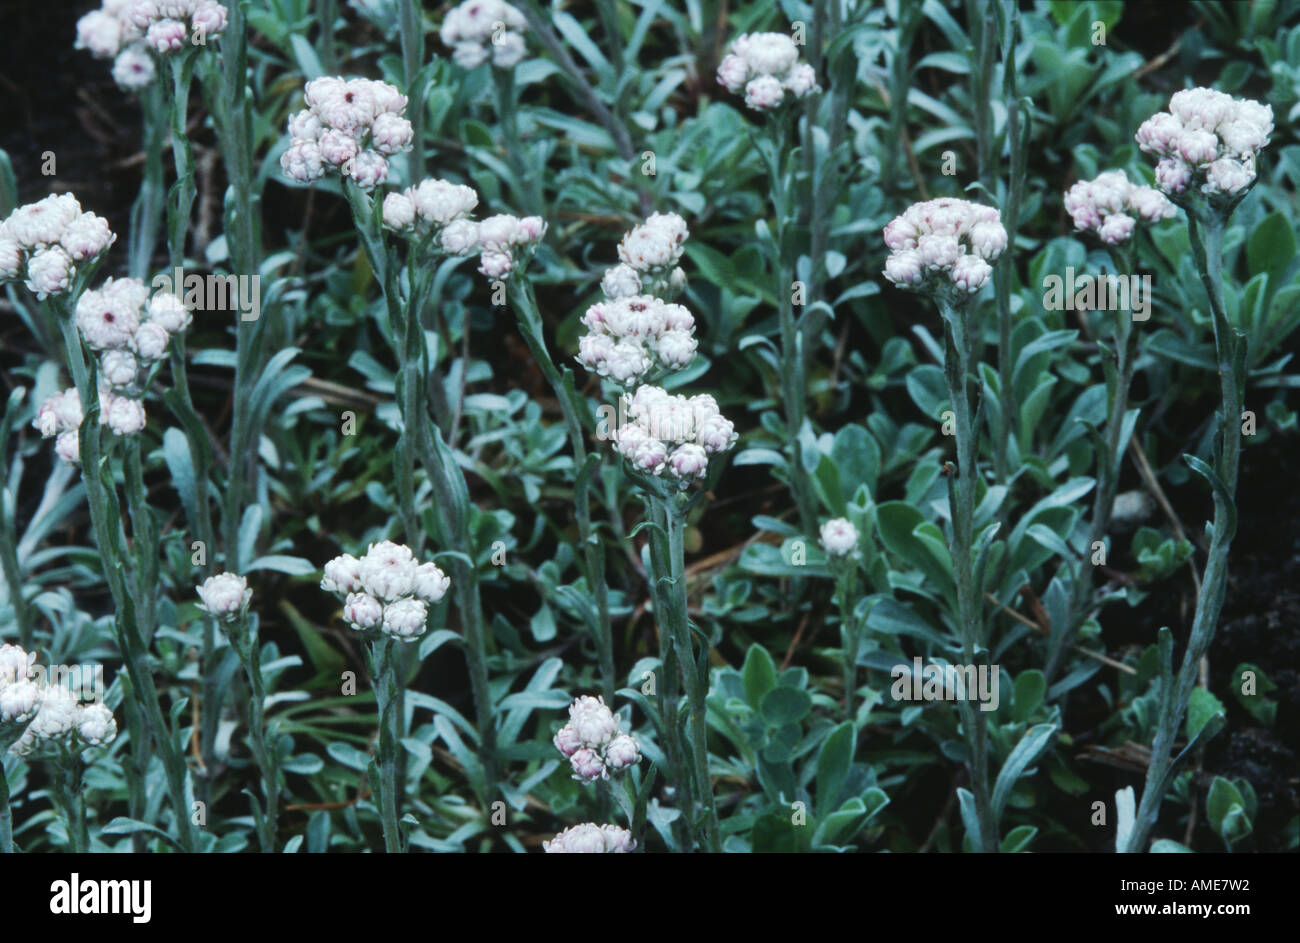 cat's-foot, mountain everlasting (Antennaria dioica), blooming Stock Photo